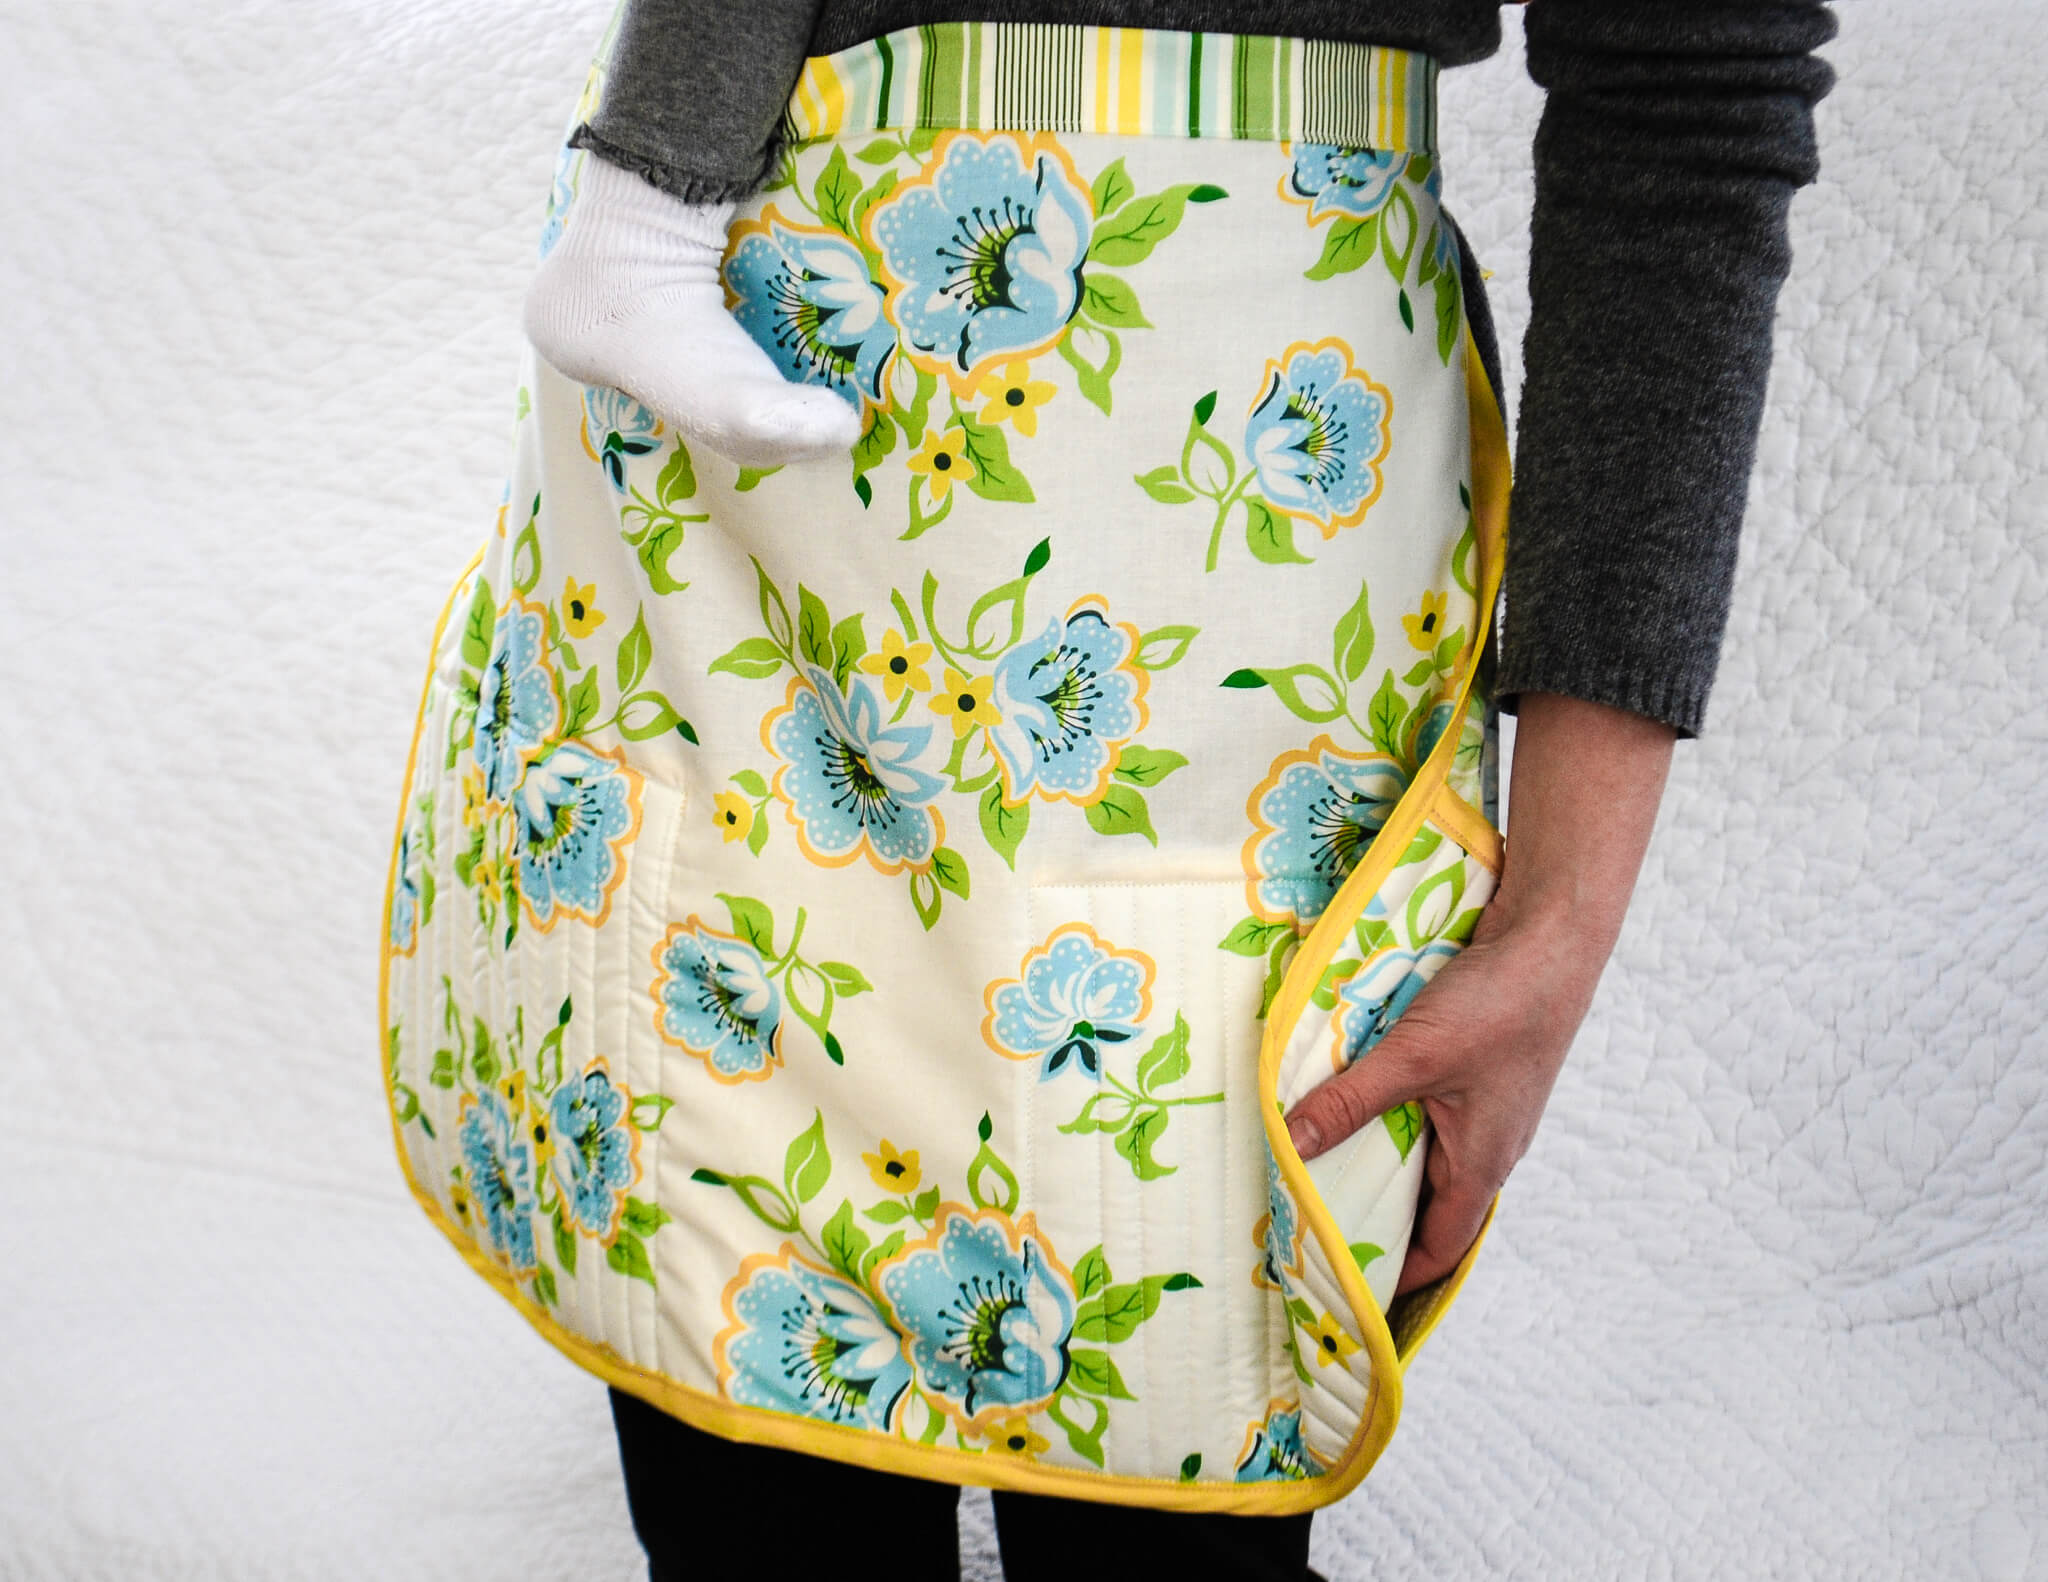 Free apron sewing pattern with built-in potholders and iPhone pocket